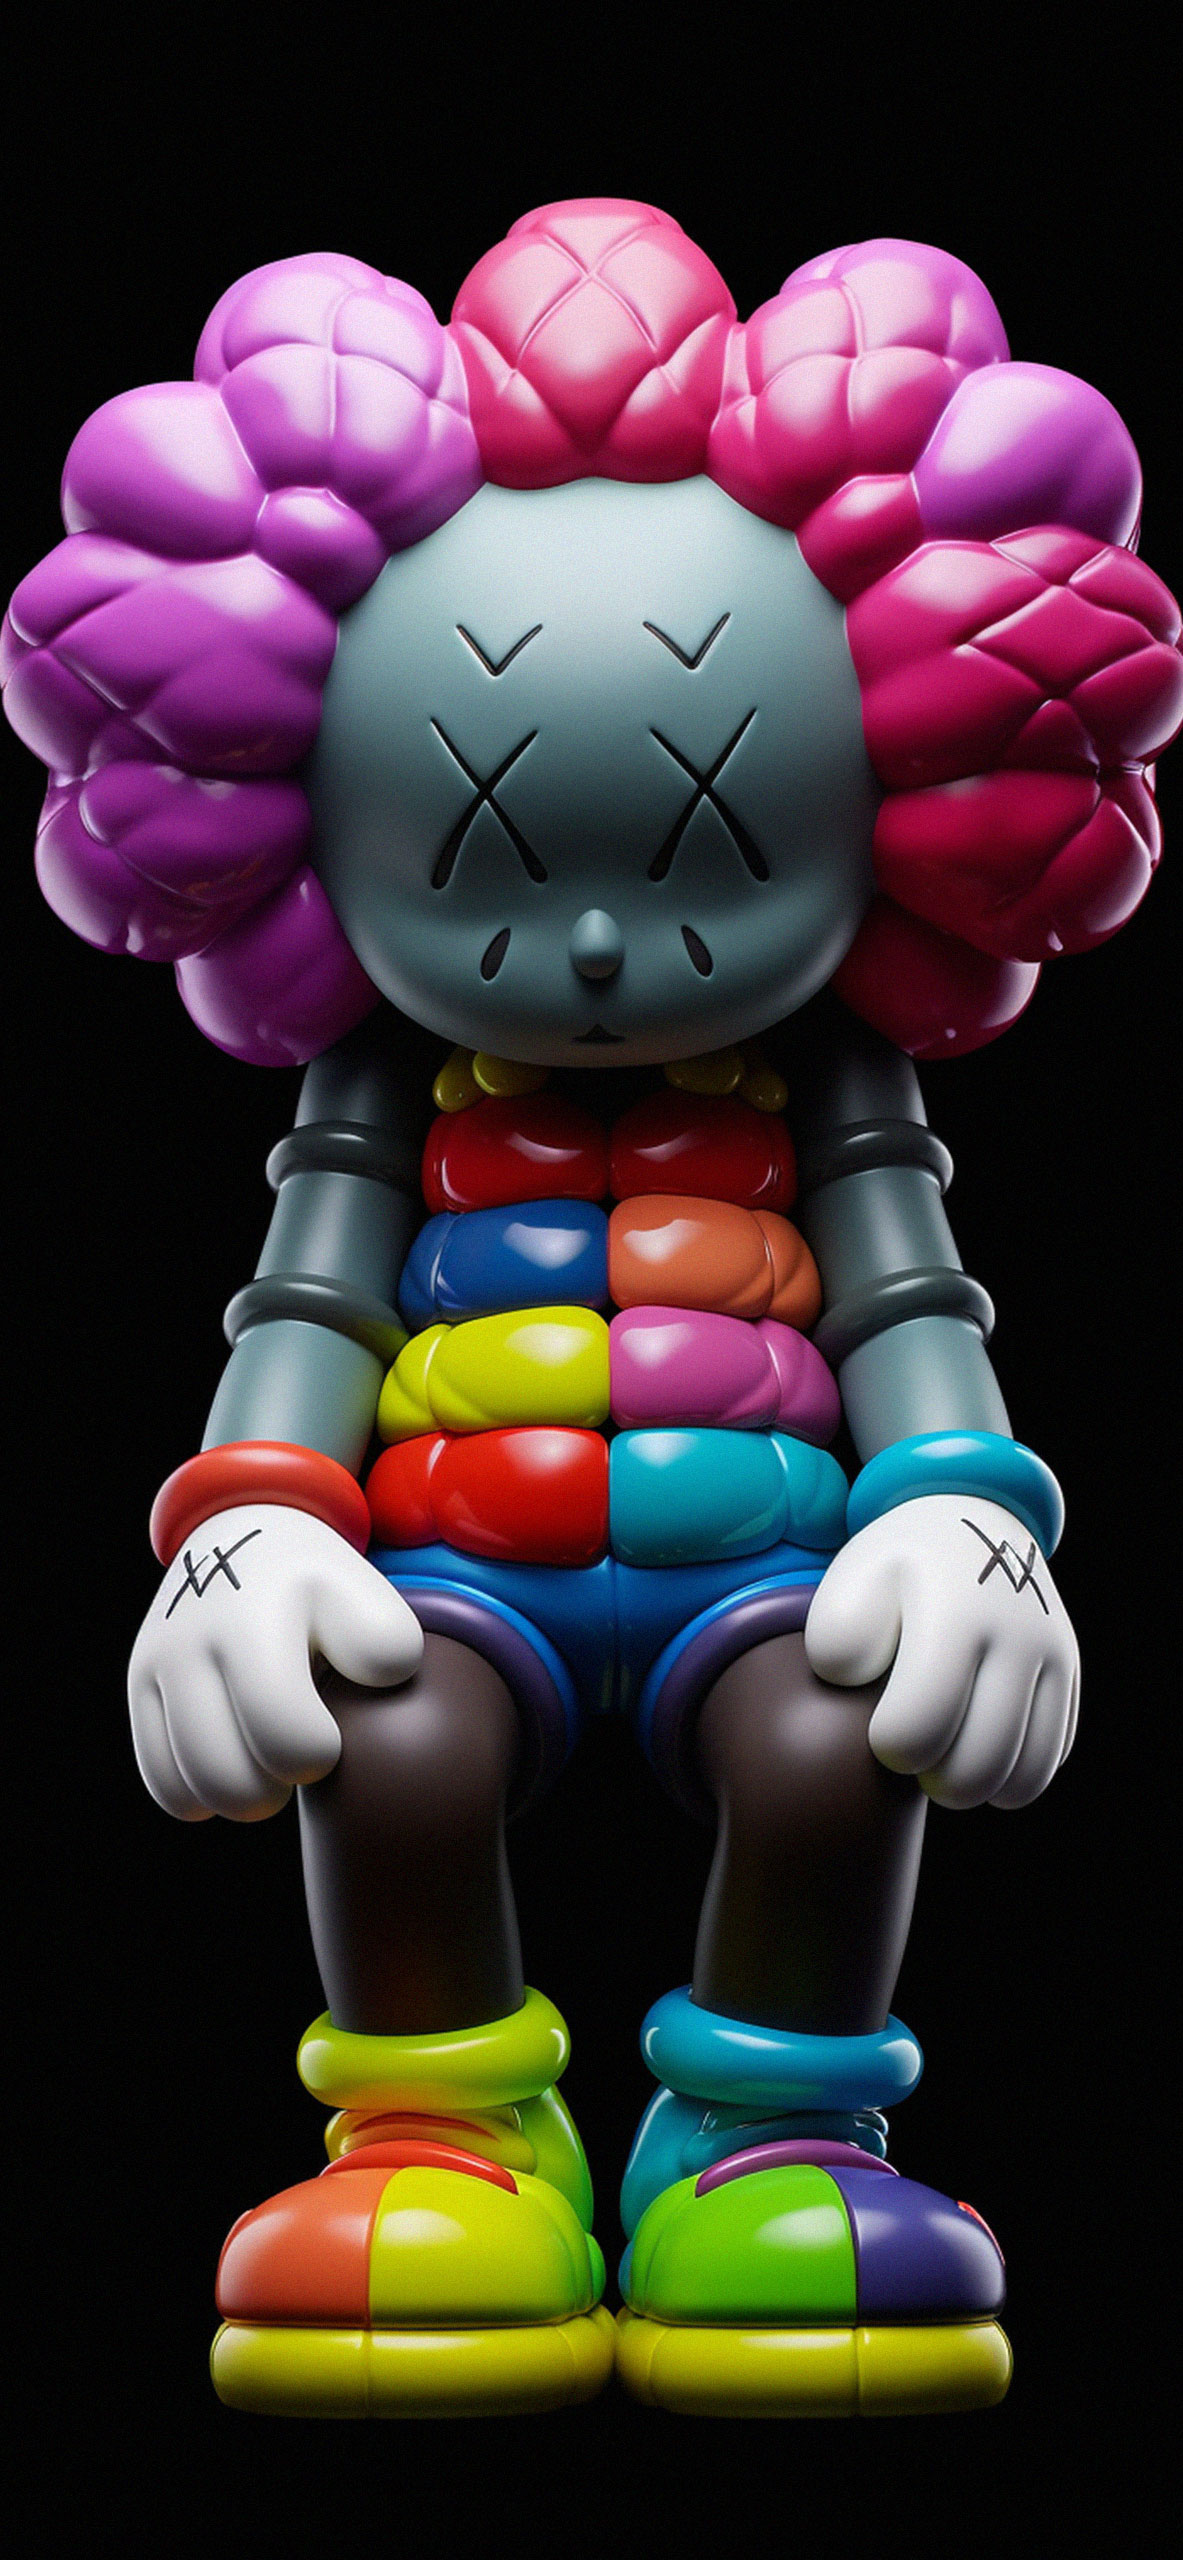 Kaws Clown Toy Black Wallpaper For iPhone